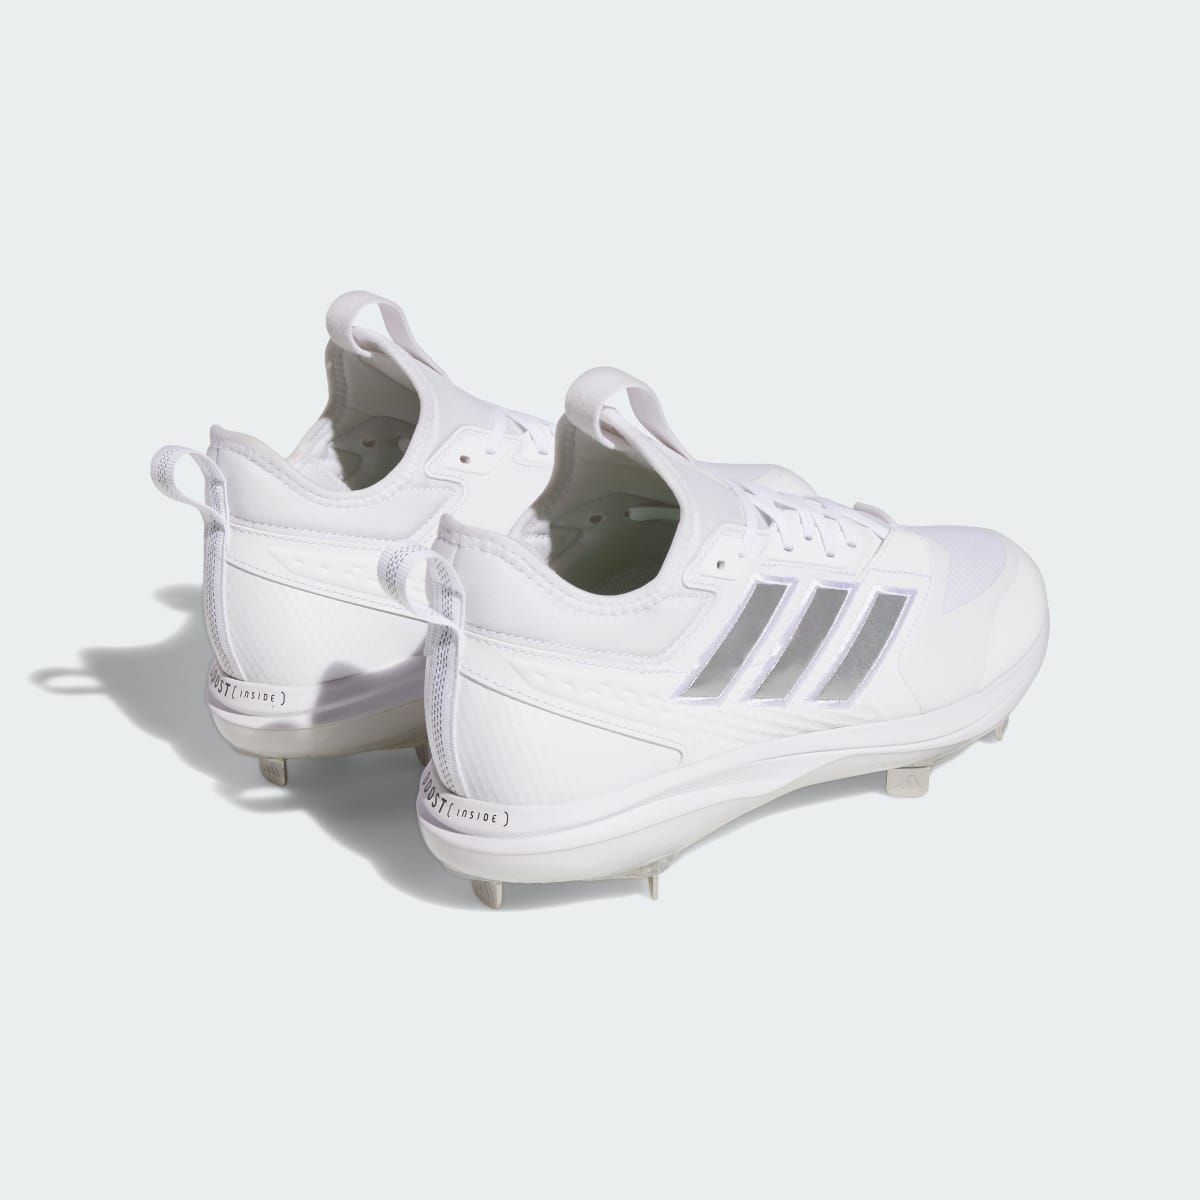 Adidas Icon 8 BOOST Cleats. 6